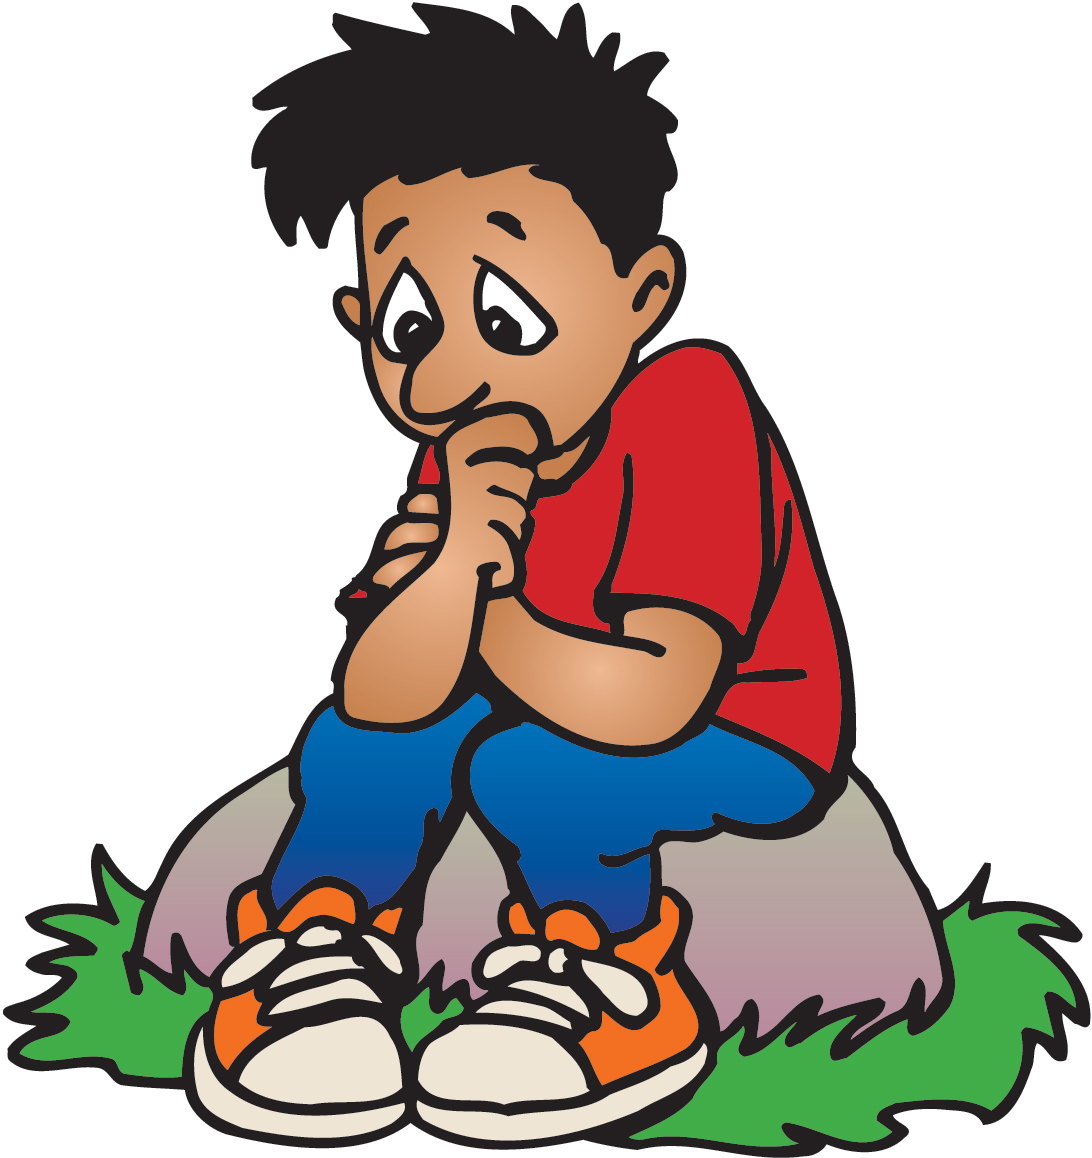 worried student clipart